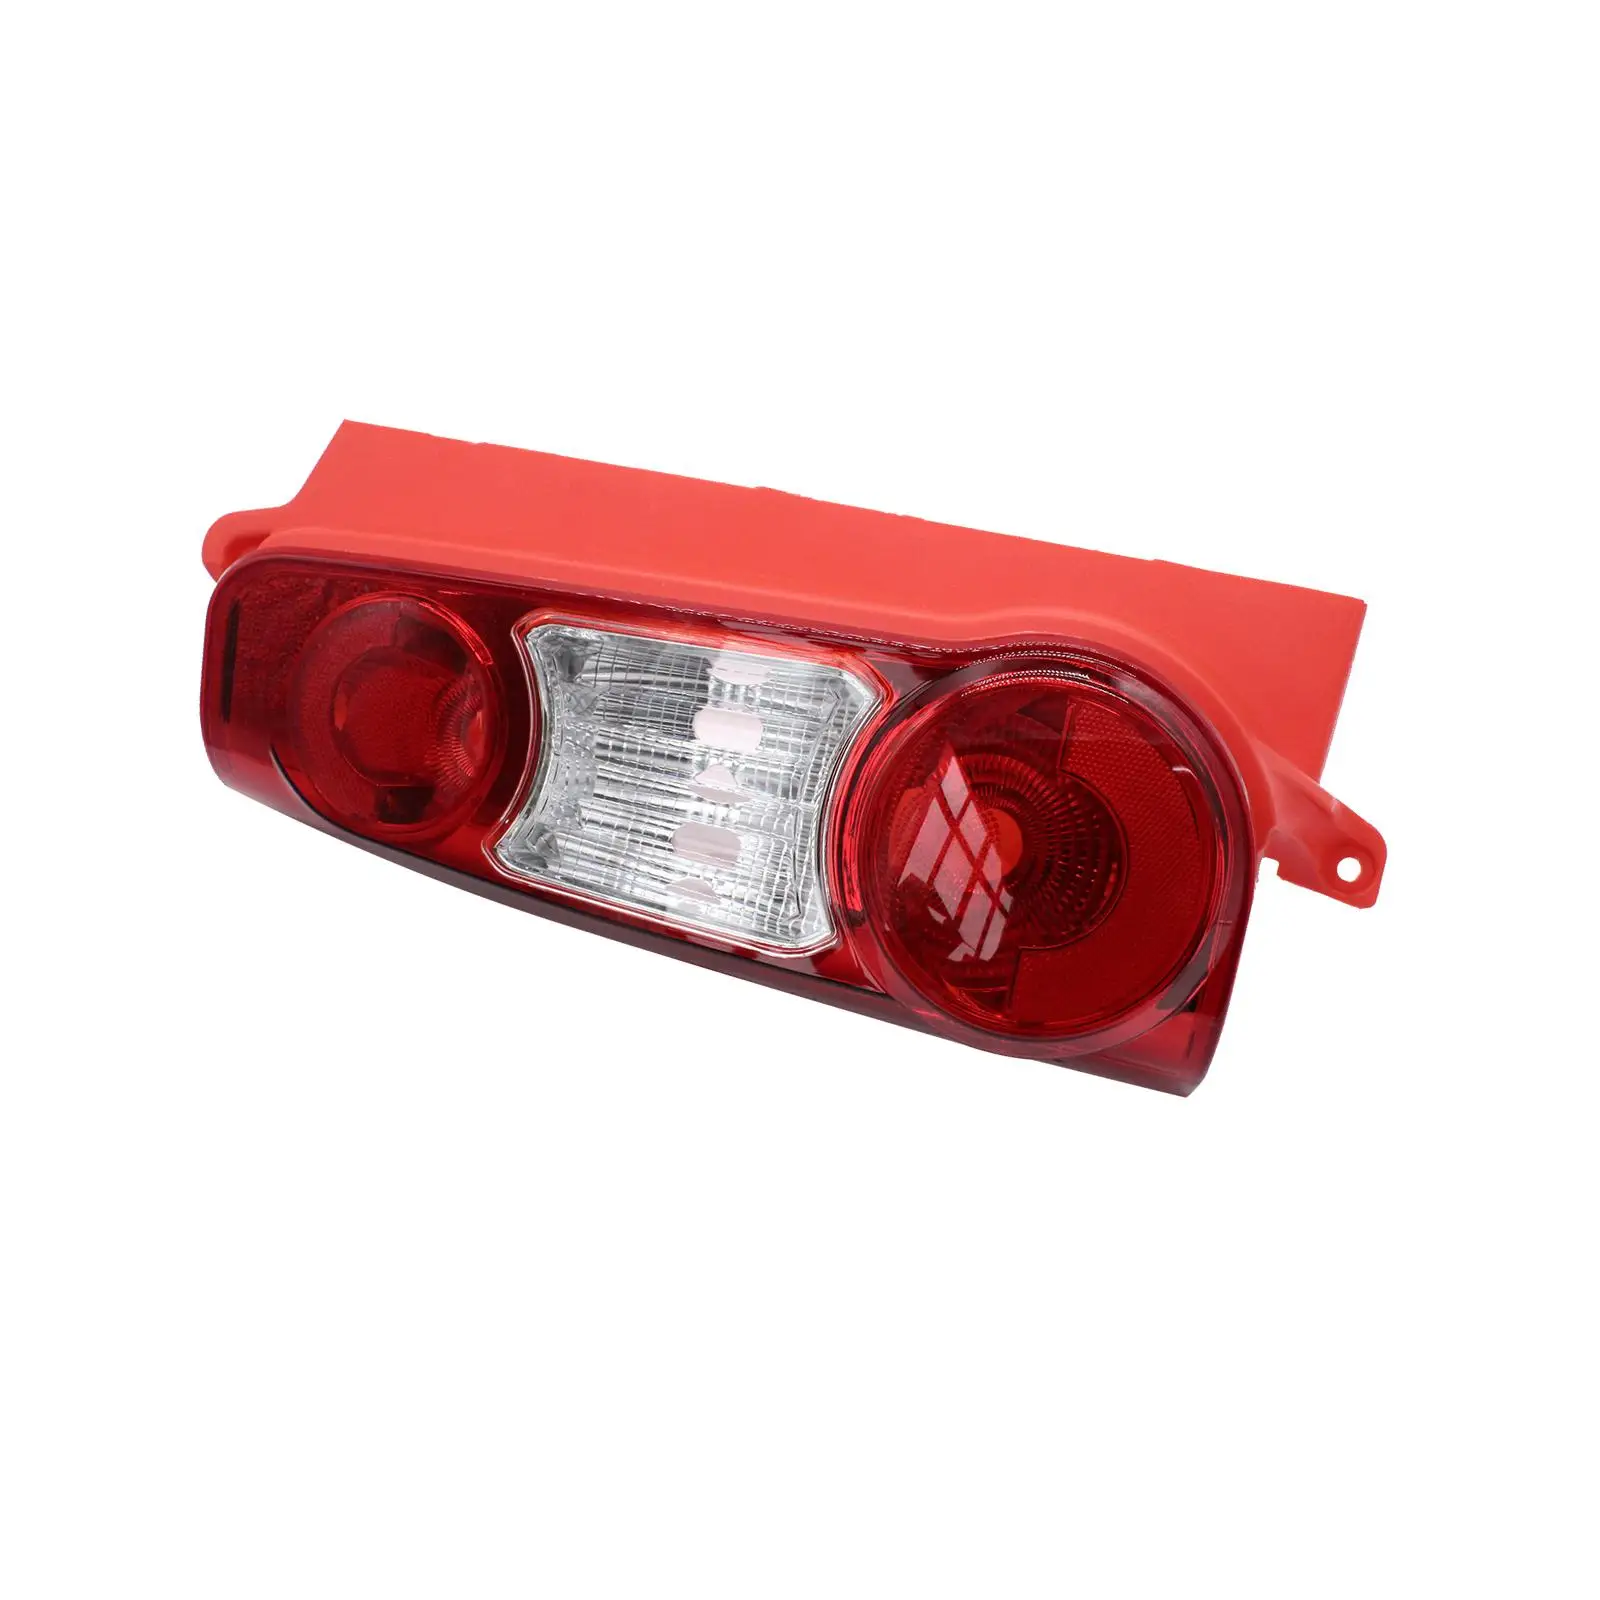 Tail Light Rear Lamp 6350FJ Repair Parts Replacement Rear Lamps for Peugeot Partner 2008-2012 Left Durable Easily Install